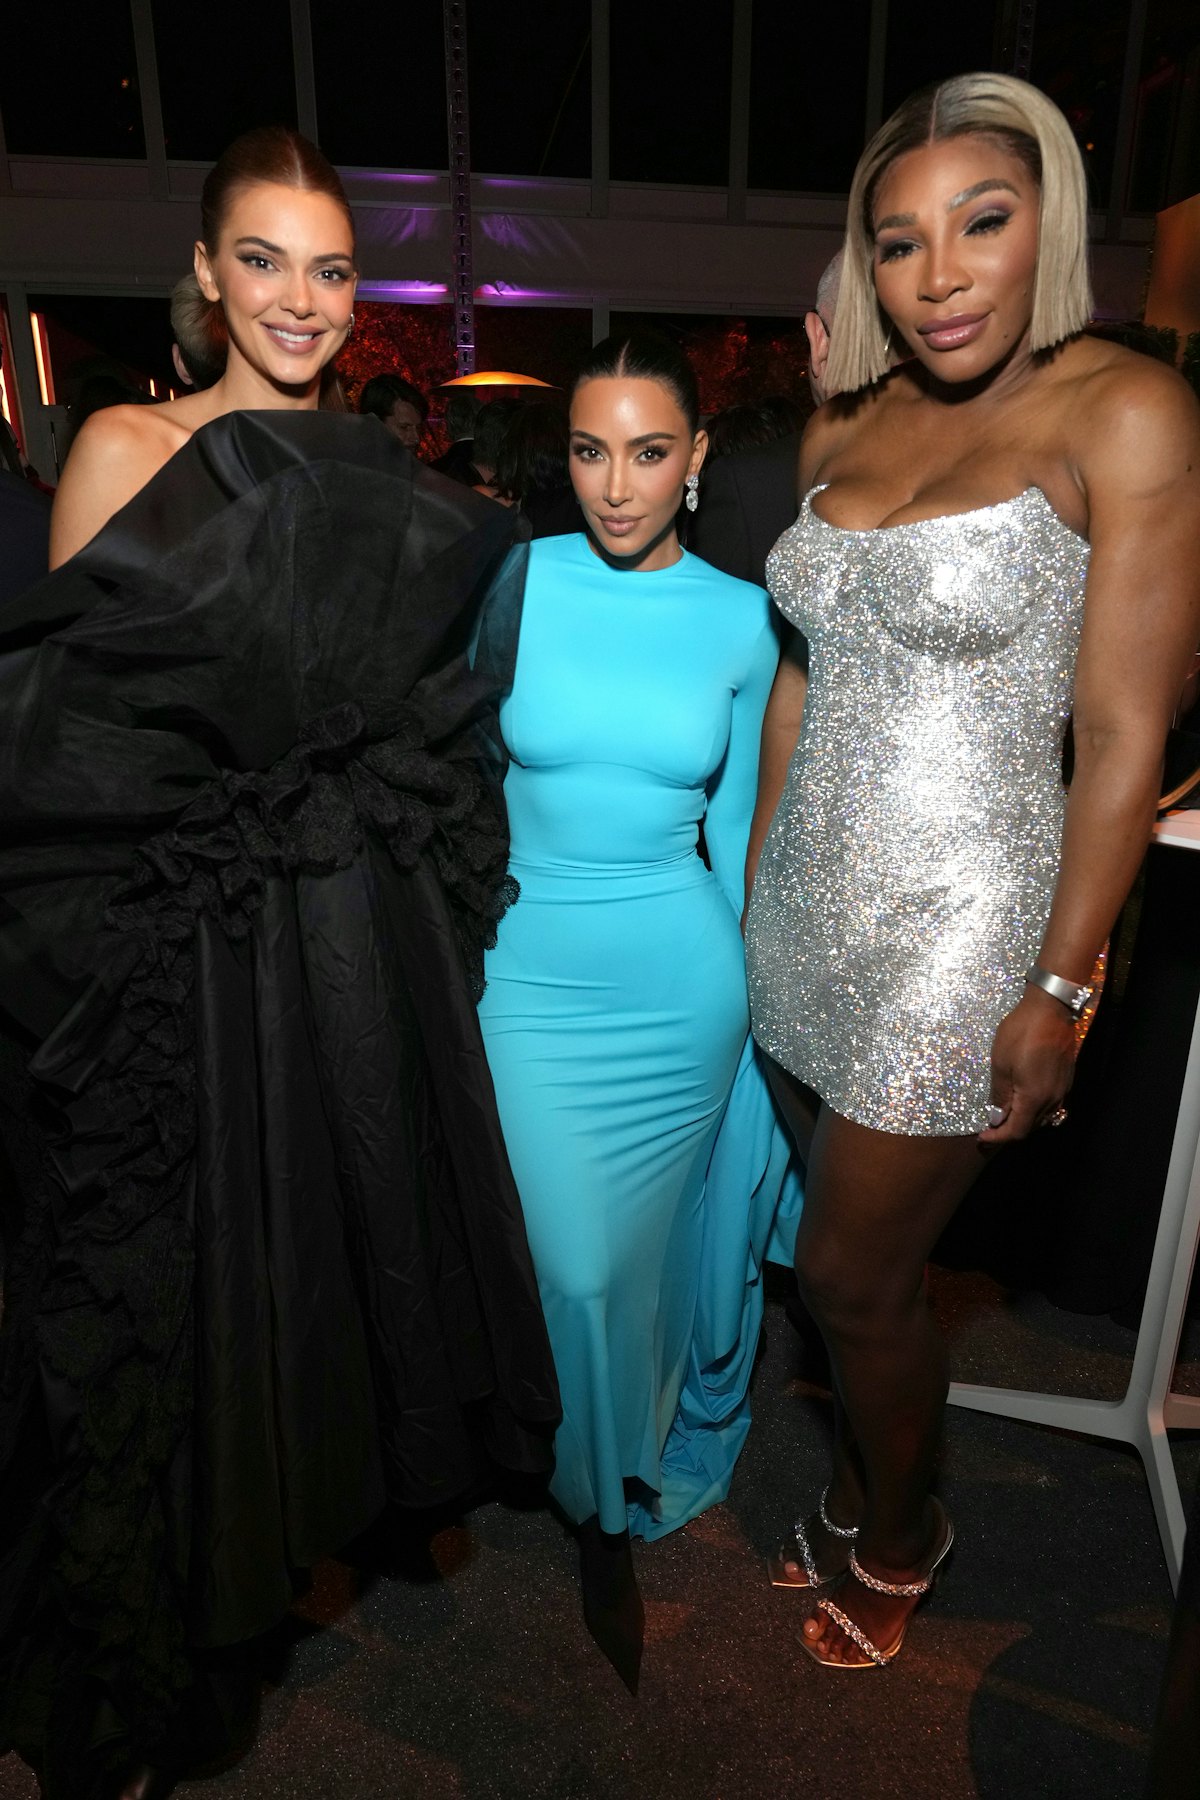 Kendall Jenner, Kim Kardashian, and Serena Williams at an Oscars after party.